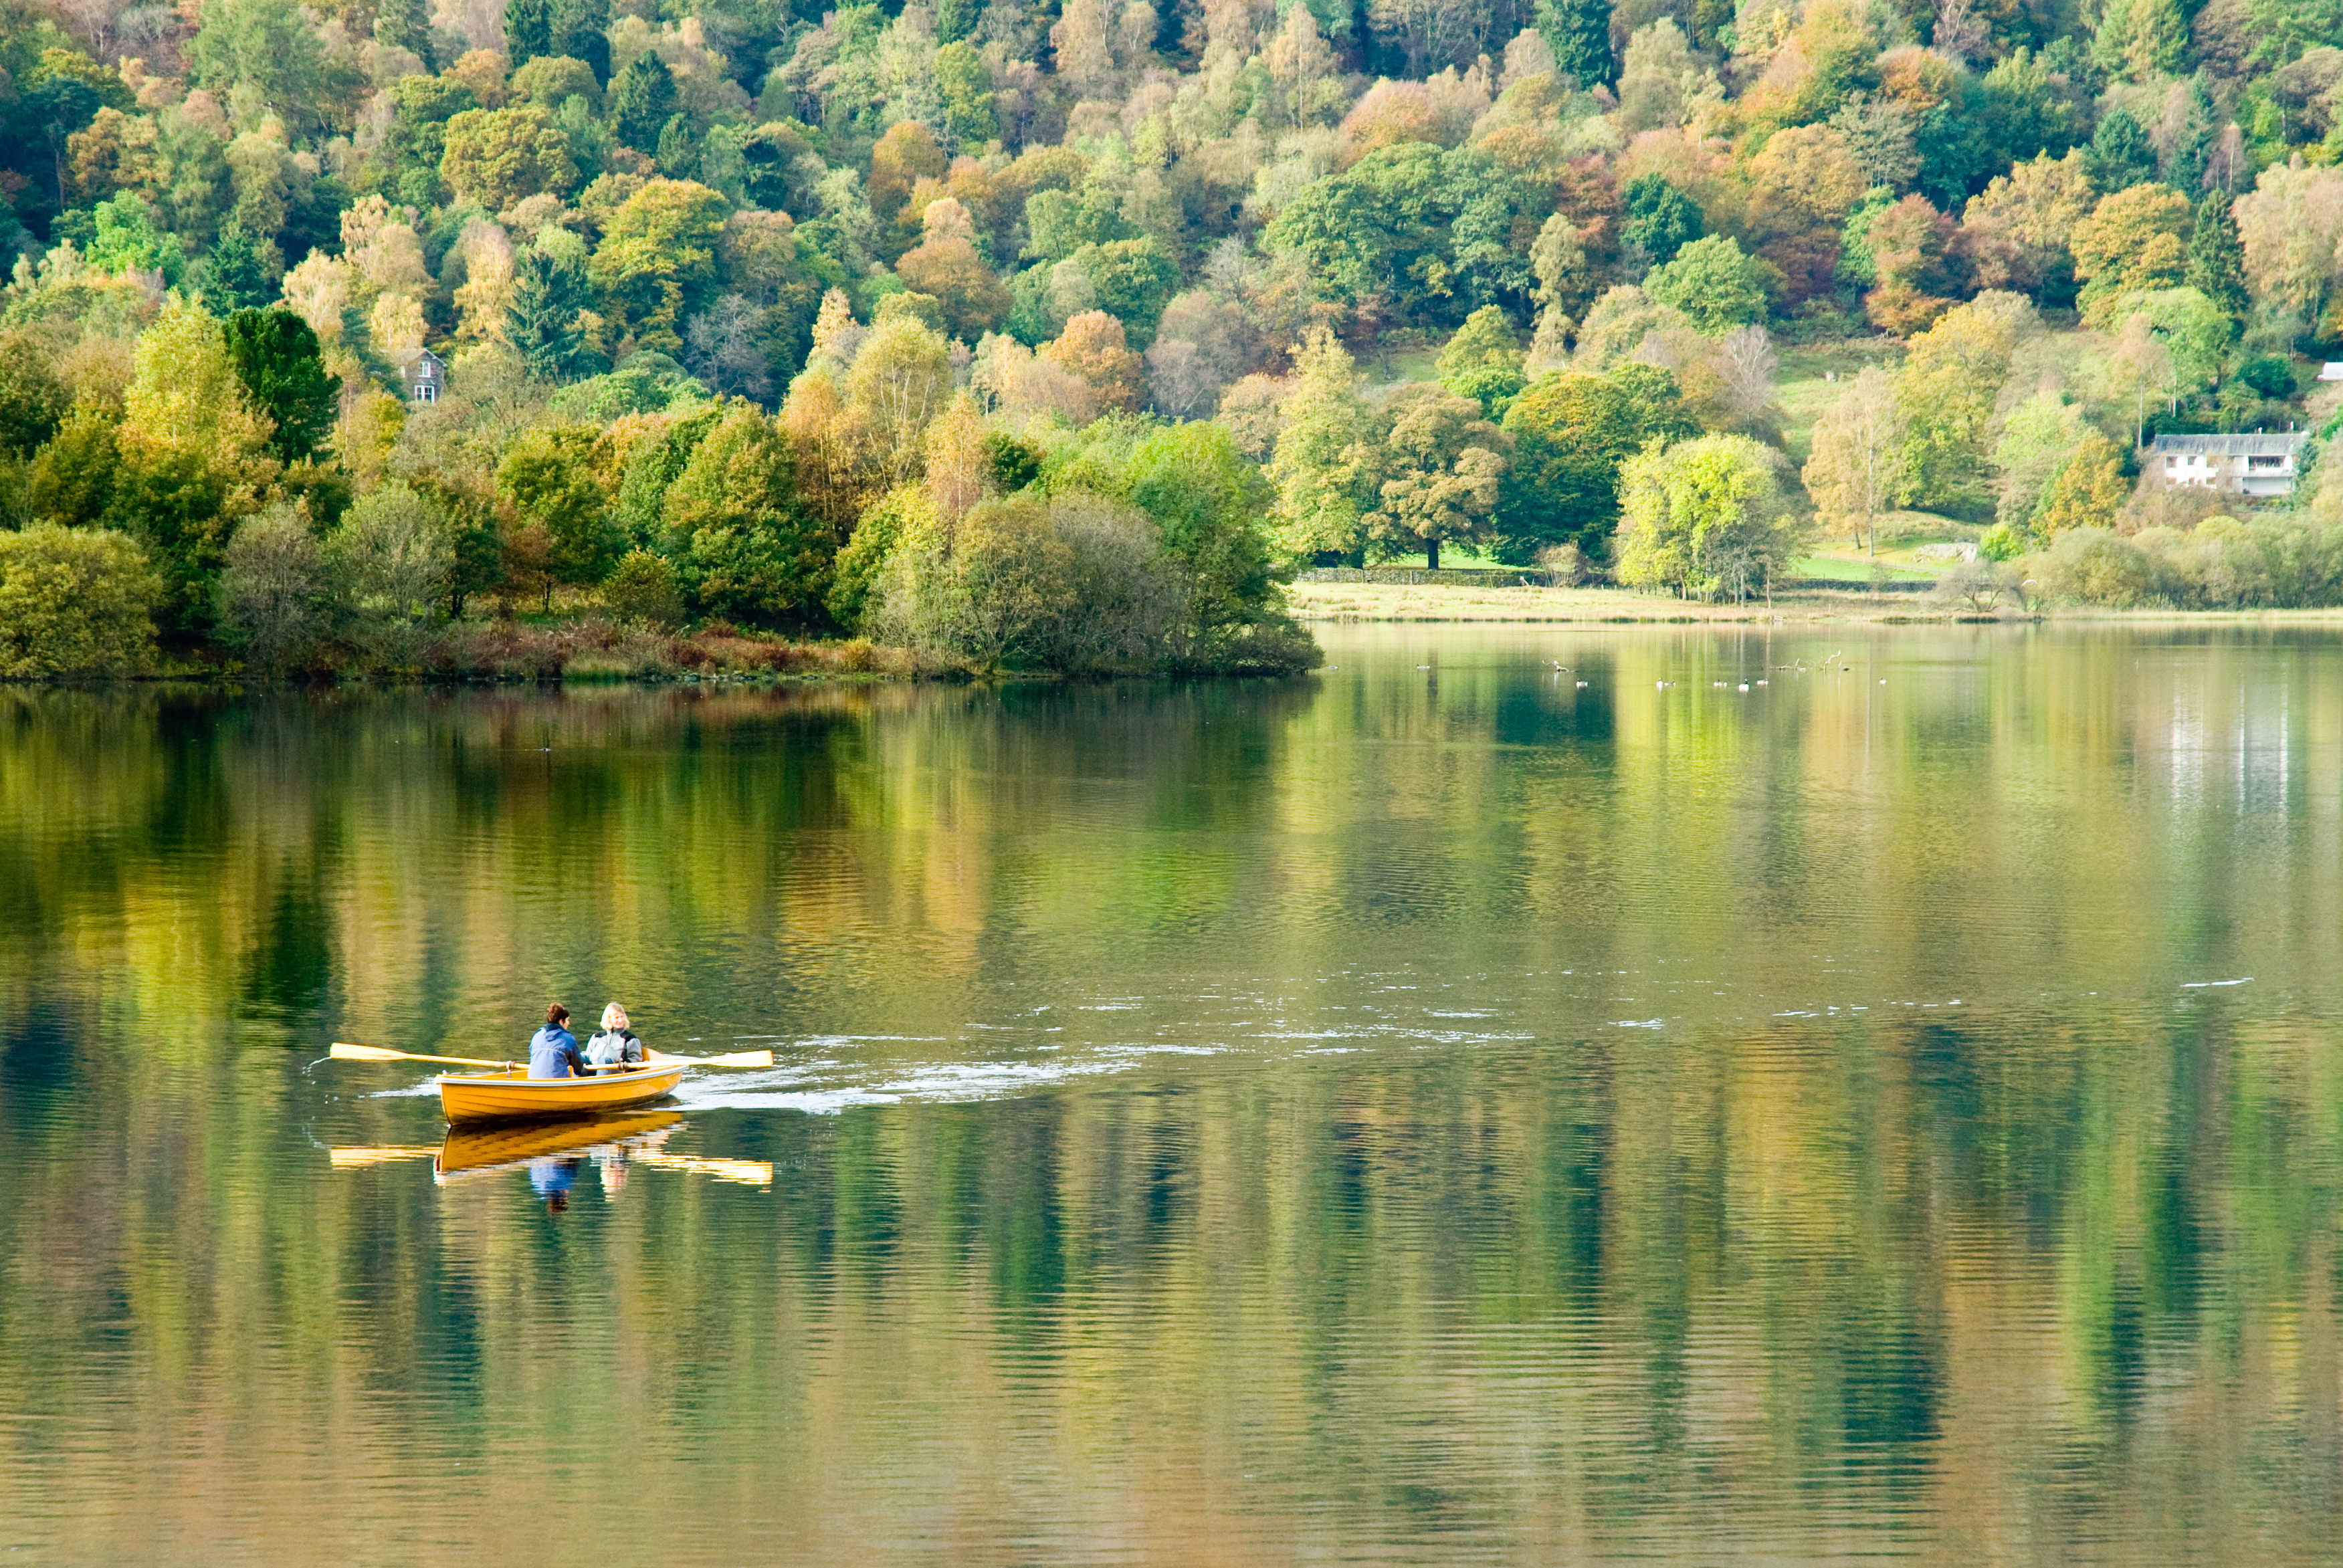 Here is a picturesque take on one of the towns/villages I have mentioned in this paragraph. Isn't this a fantastic photo of Grasmere Lake? Two canoeists row in the still deep silence of a glassy lake which reflects the beauty of its surroundings. (Photo courtesy of www.cumbriaphoto.co.uk.)